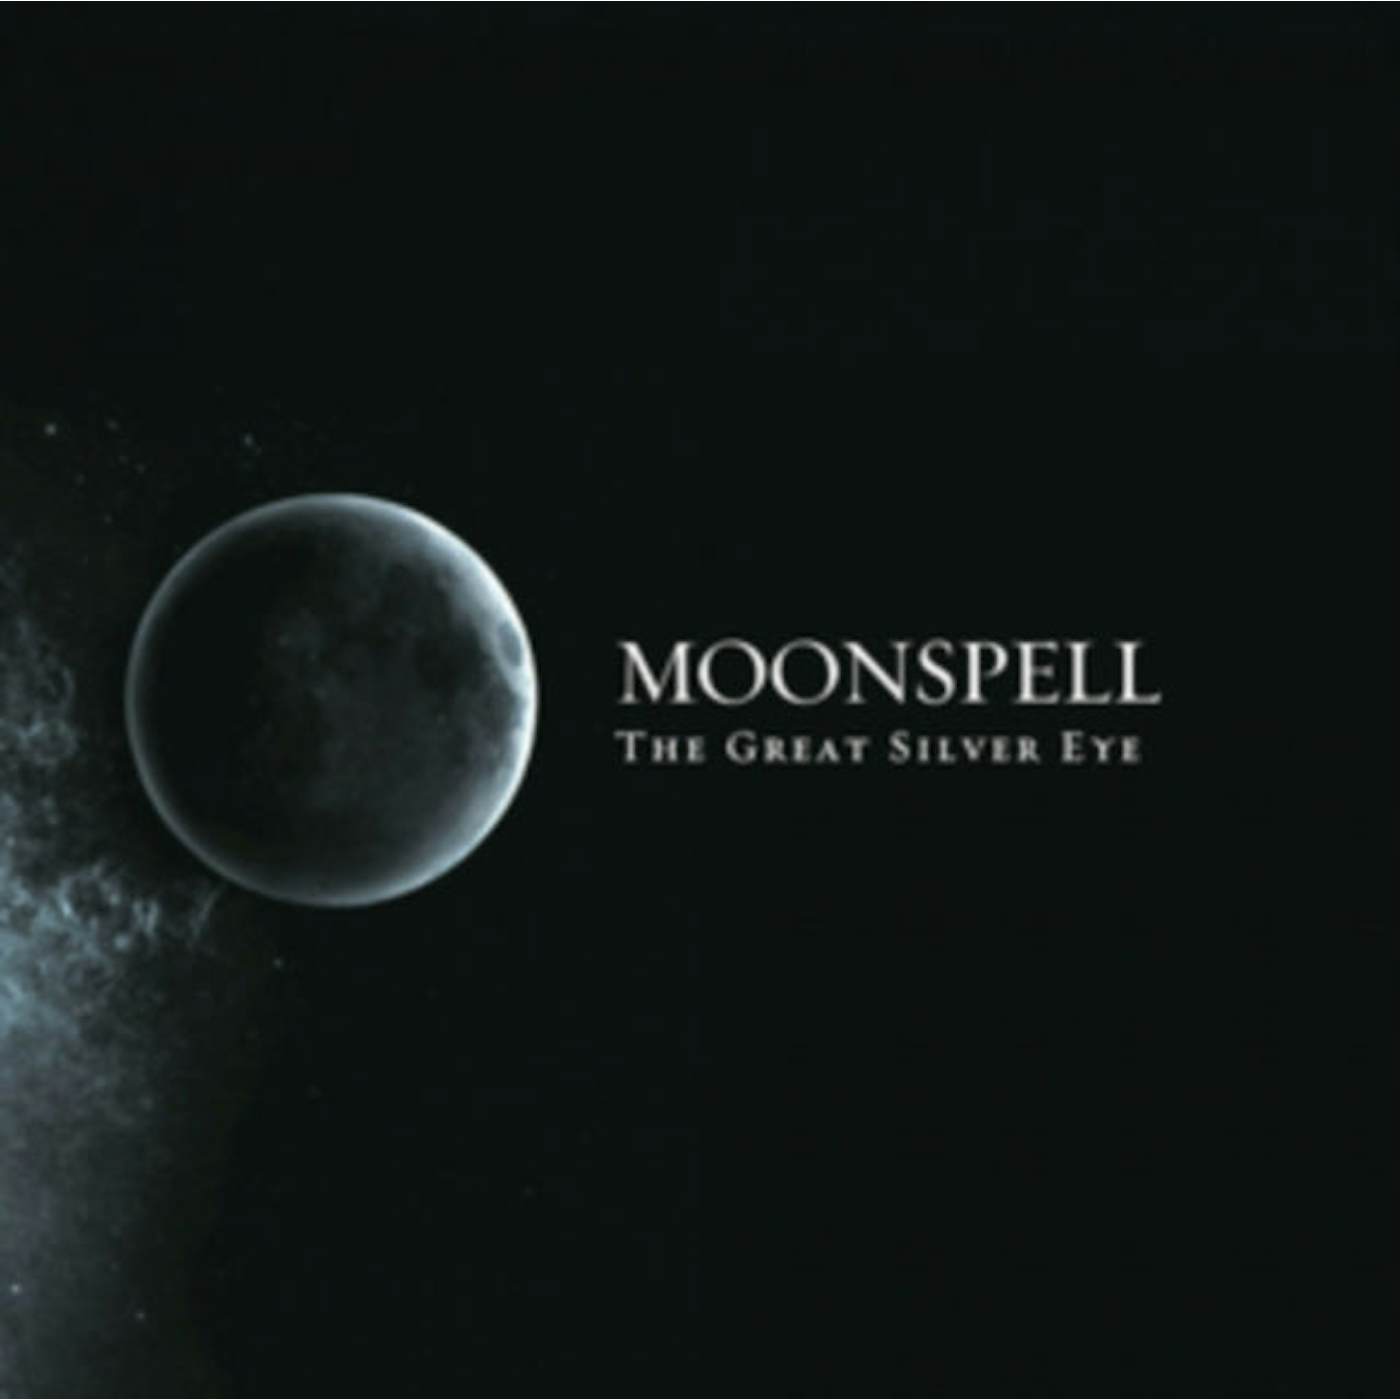 Moonspell CD - The Great Silver Eye